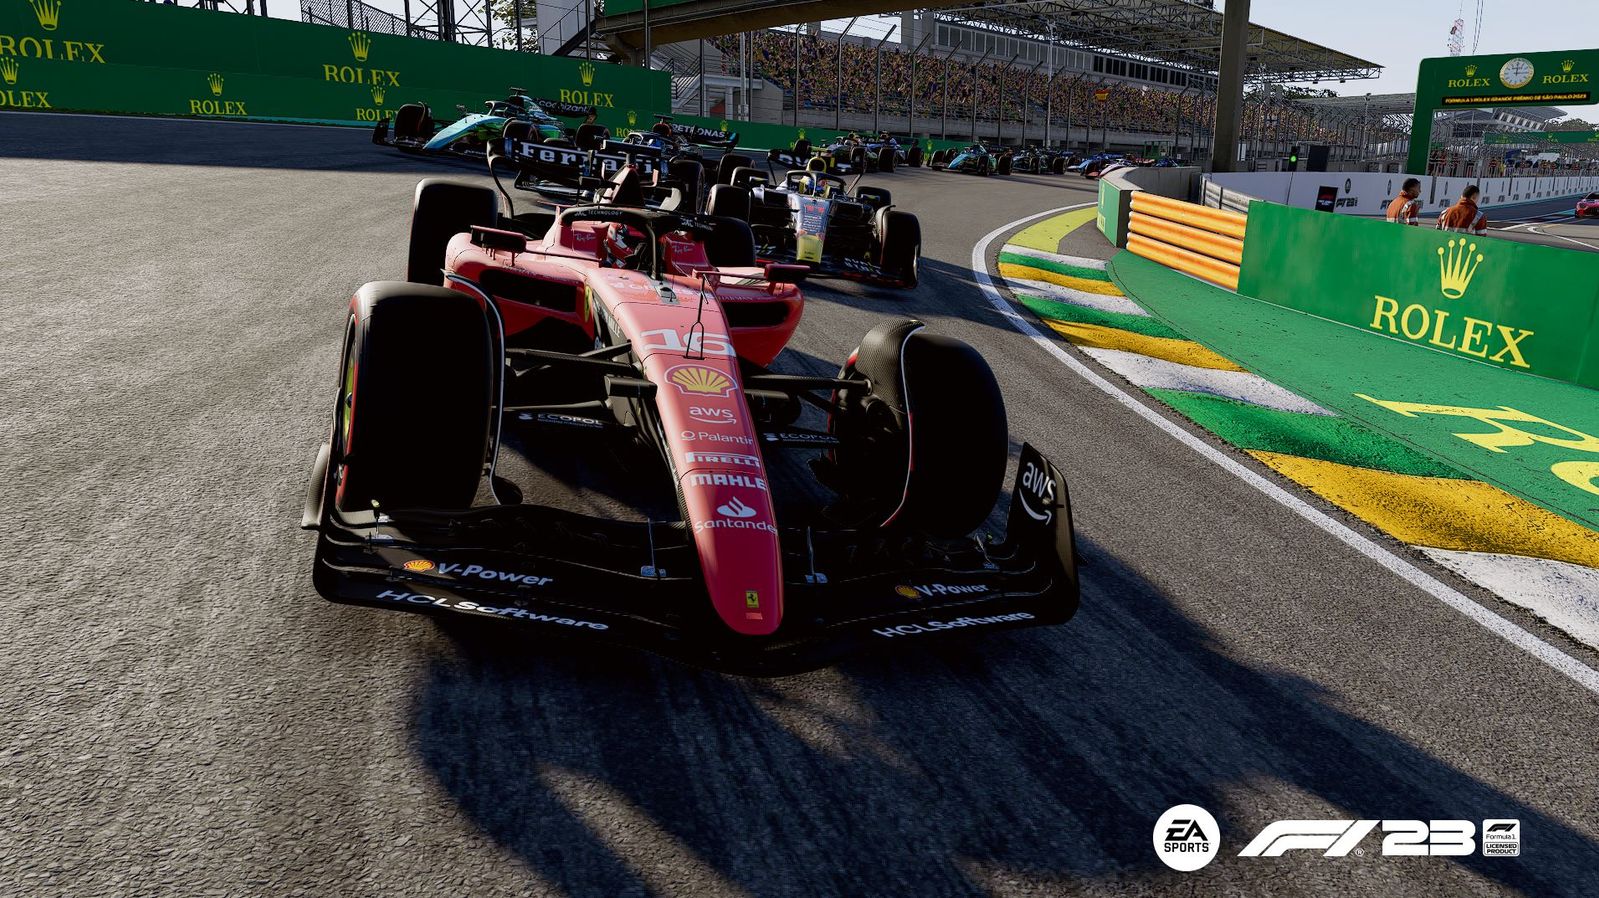 The Ferrari of Charles Leclerc leading the field through the Senna esses in Brazil in F1 23